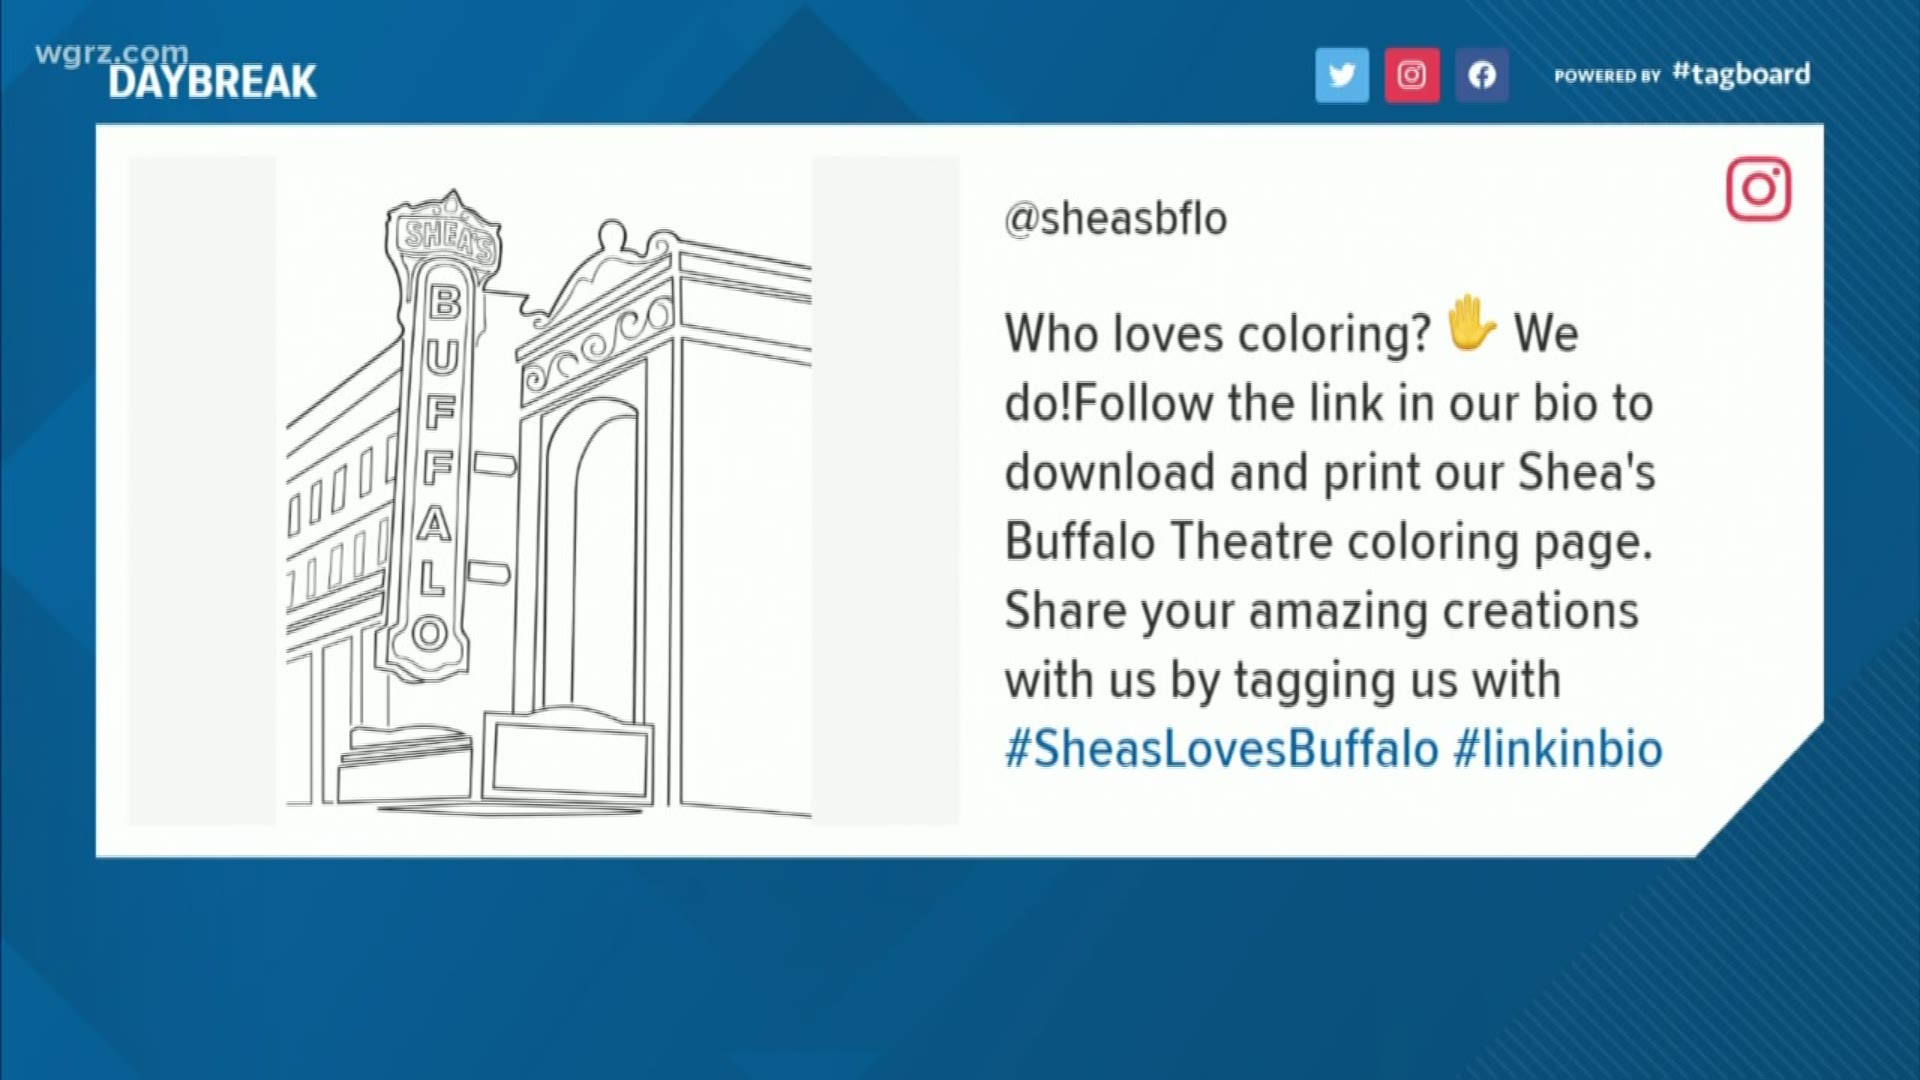 Shea's Buffalo asking patrons to show off their artistic ability online